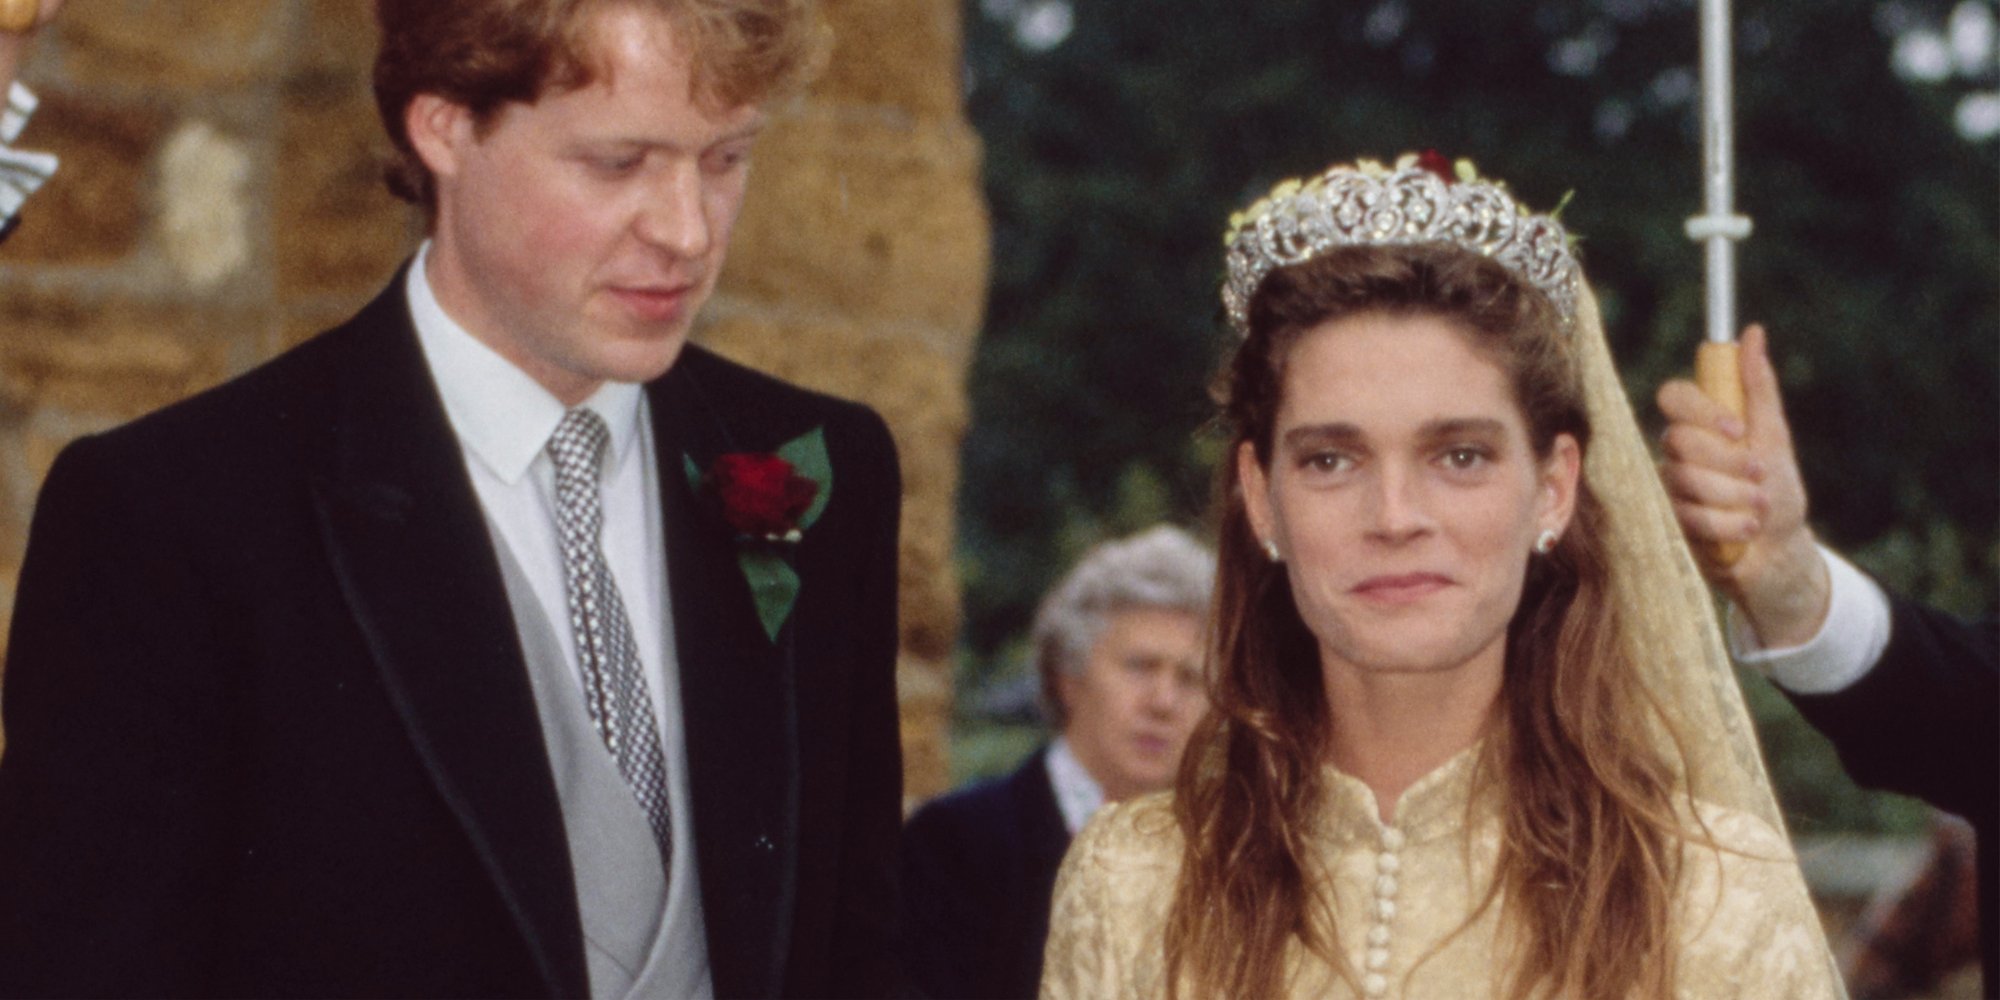 Earl Spencer and Victoria Lockwood at their 1989 wedding where she wears the Spencer tiara.